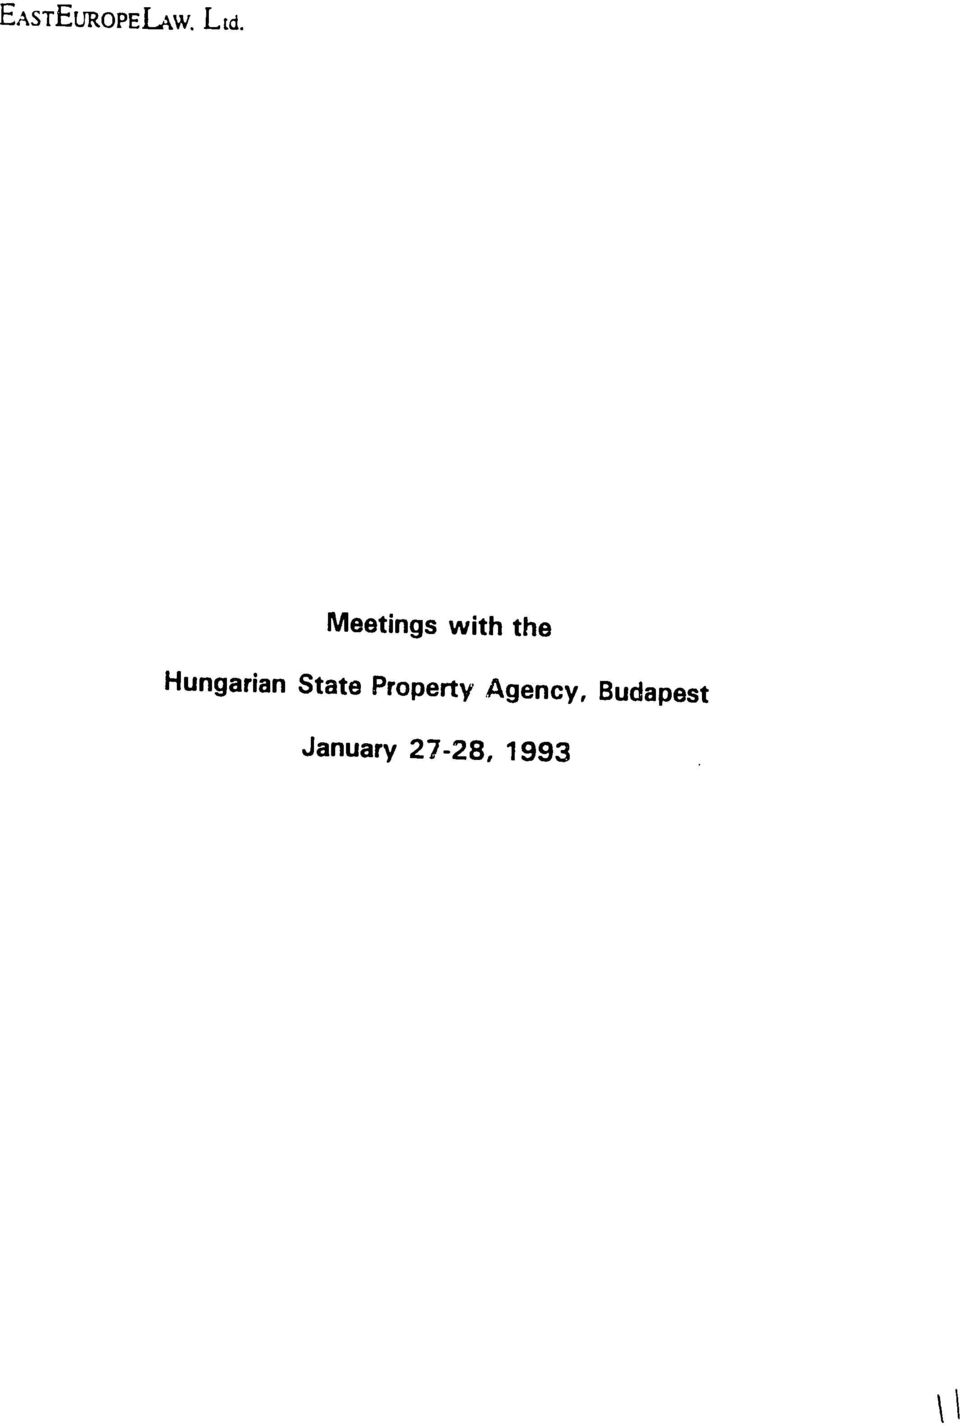 Hungarian State Property